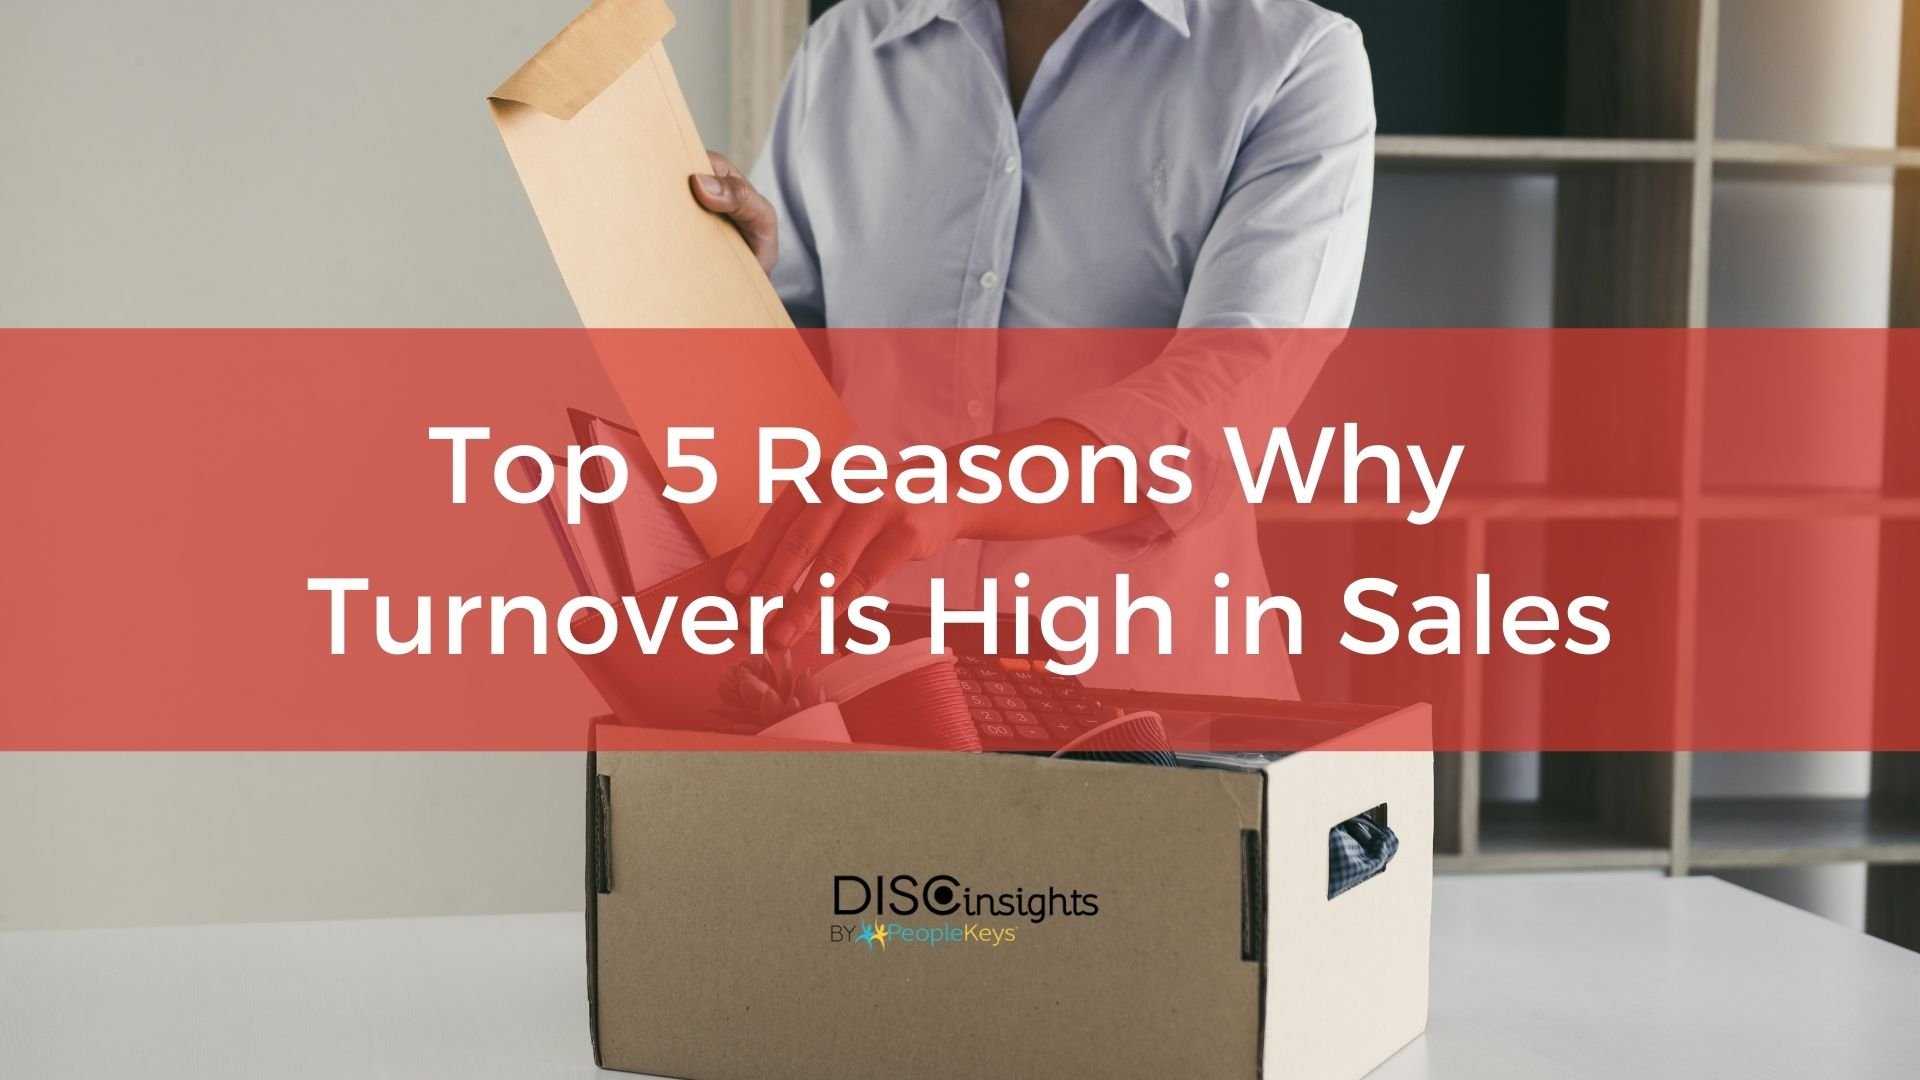 Top 5 Reasons Why Turnover is High in Sales